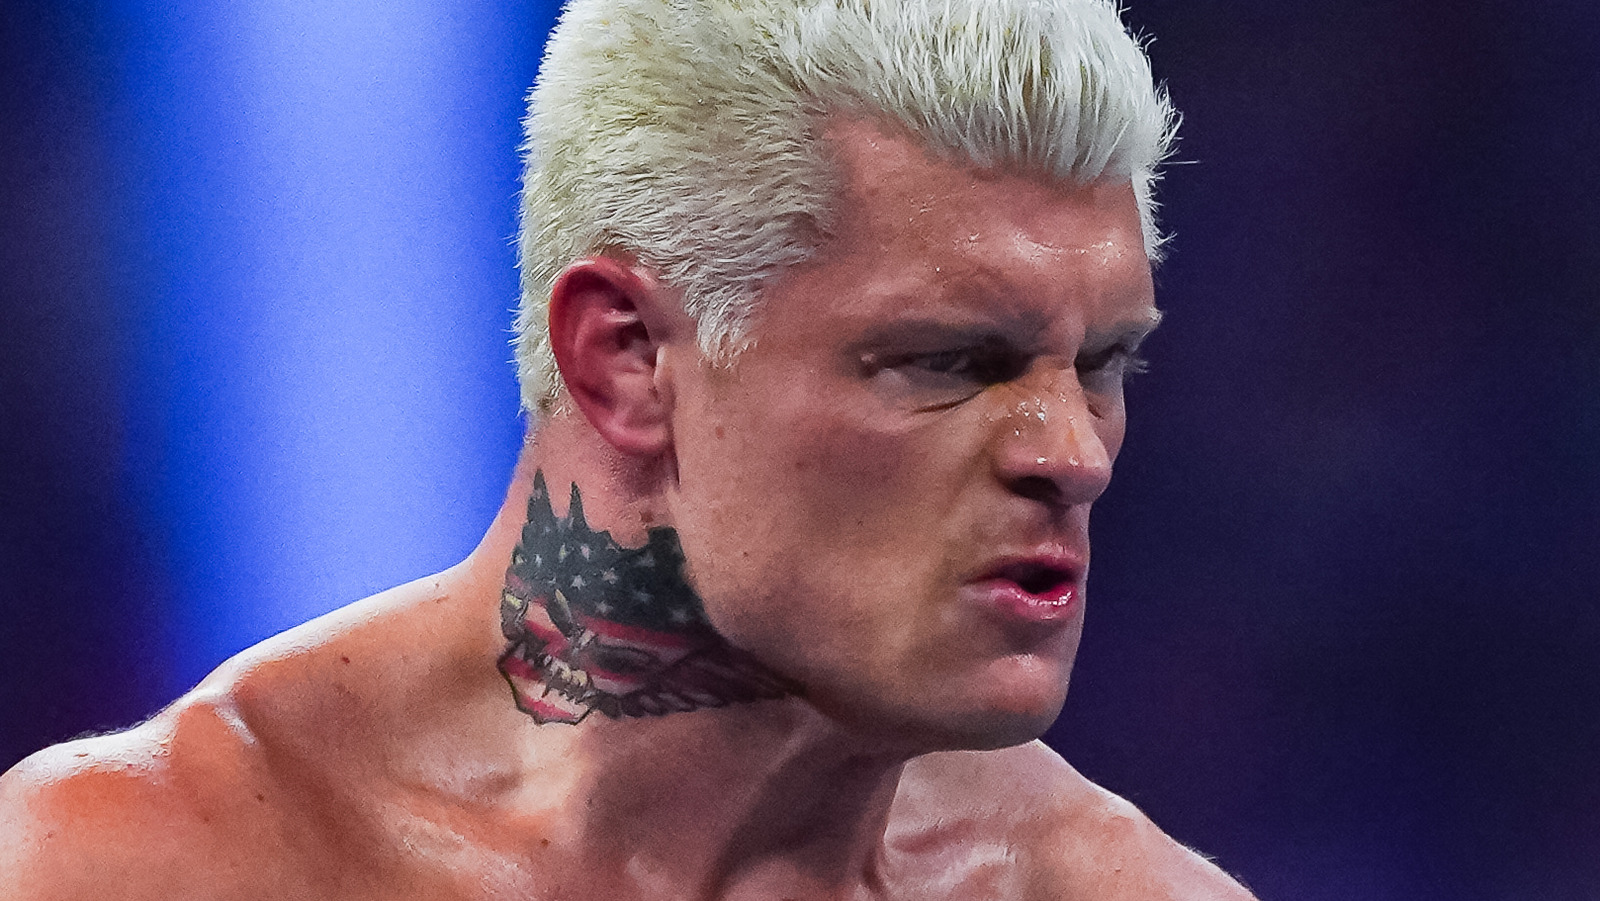 Big Swole Saw 'Signs' Cody Rhodes Was Leaving AEW, Says His WWE Run Is On Talents' Mind